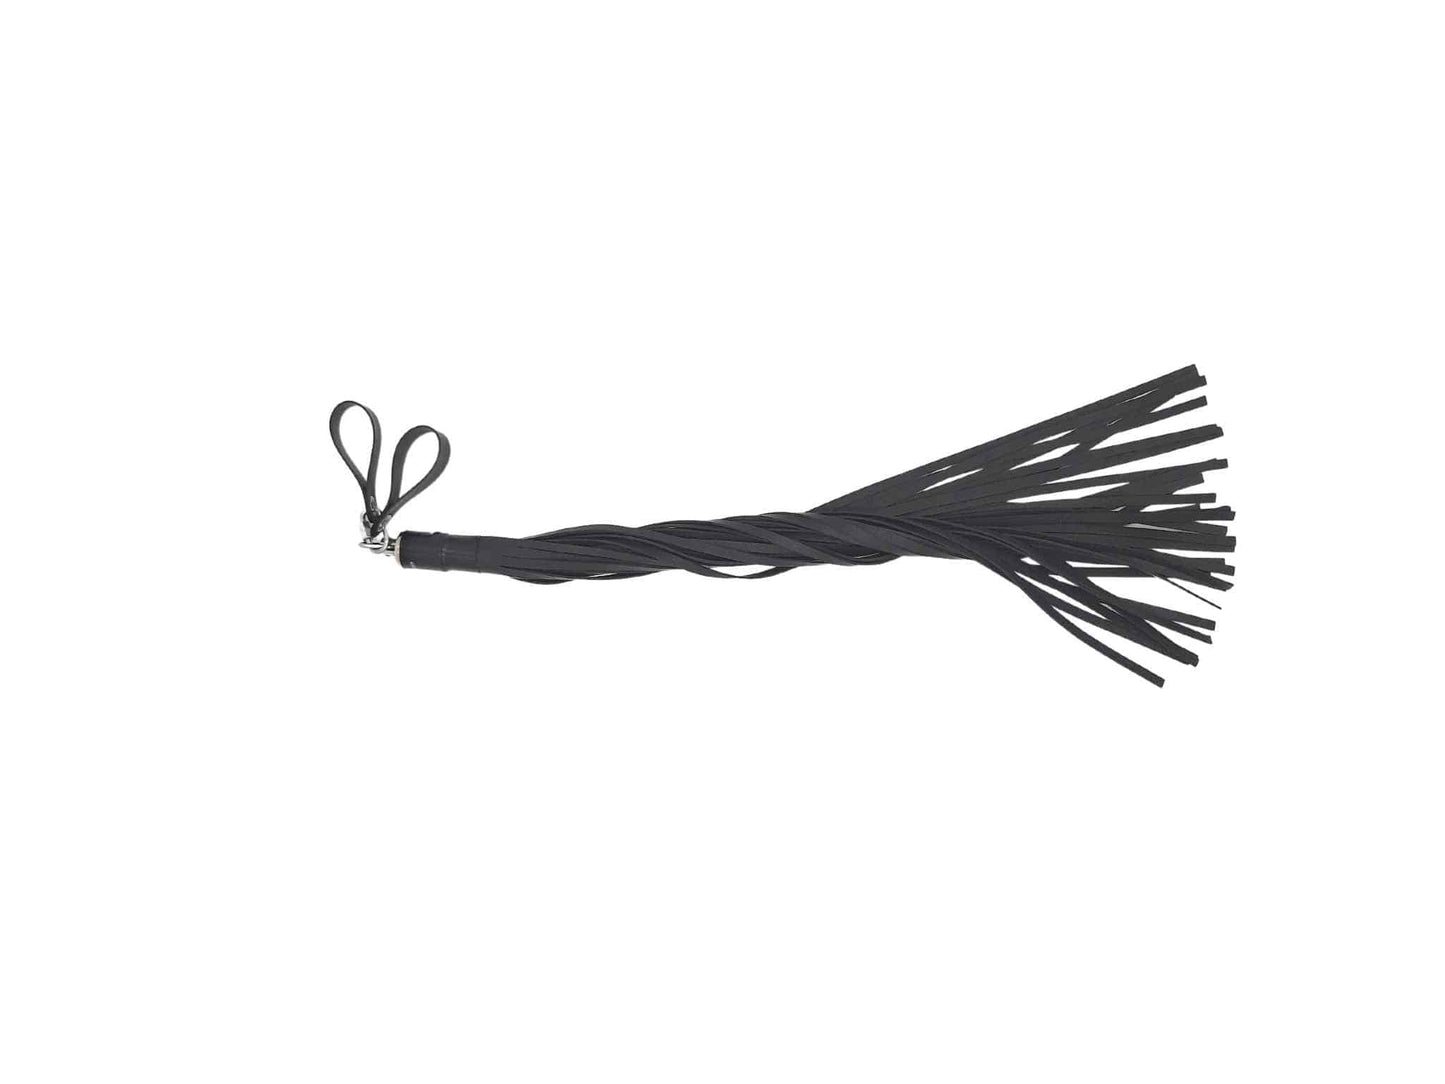 The Electro Rubber Flogger for Violet Wand laying flat and twisted.